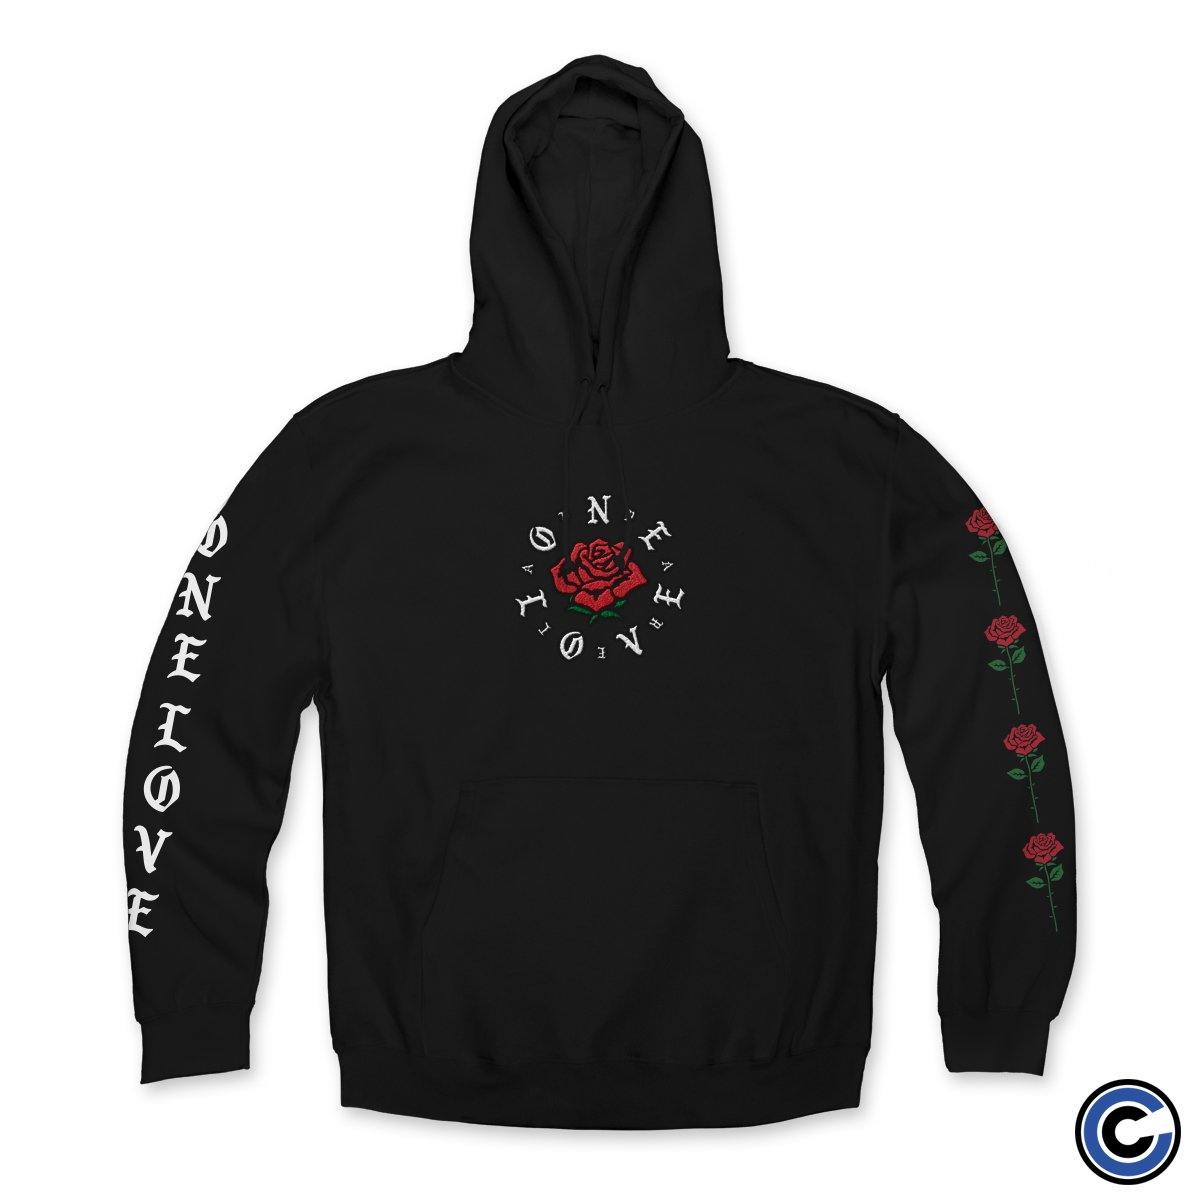 Buy – One Love Apparel "One Rose" Hoodie – Band & Music Merch – Cold Cuts Merch